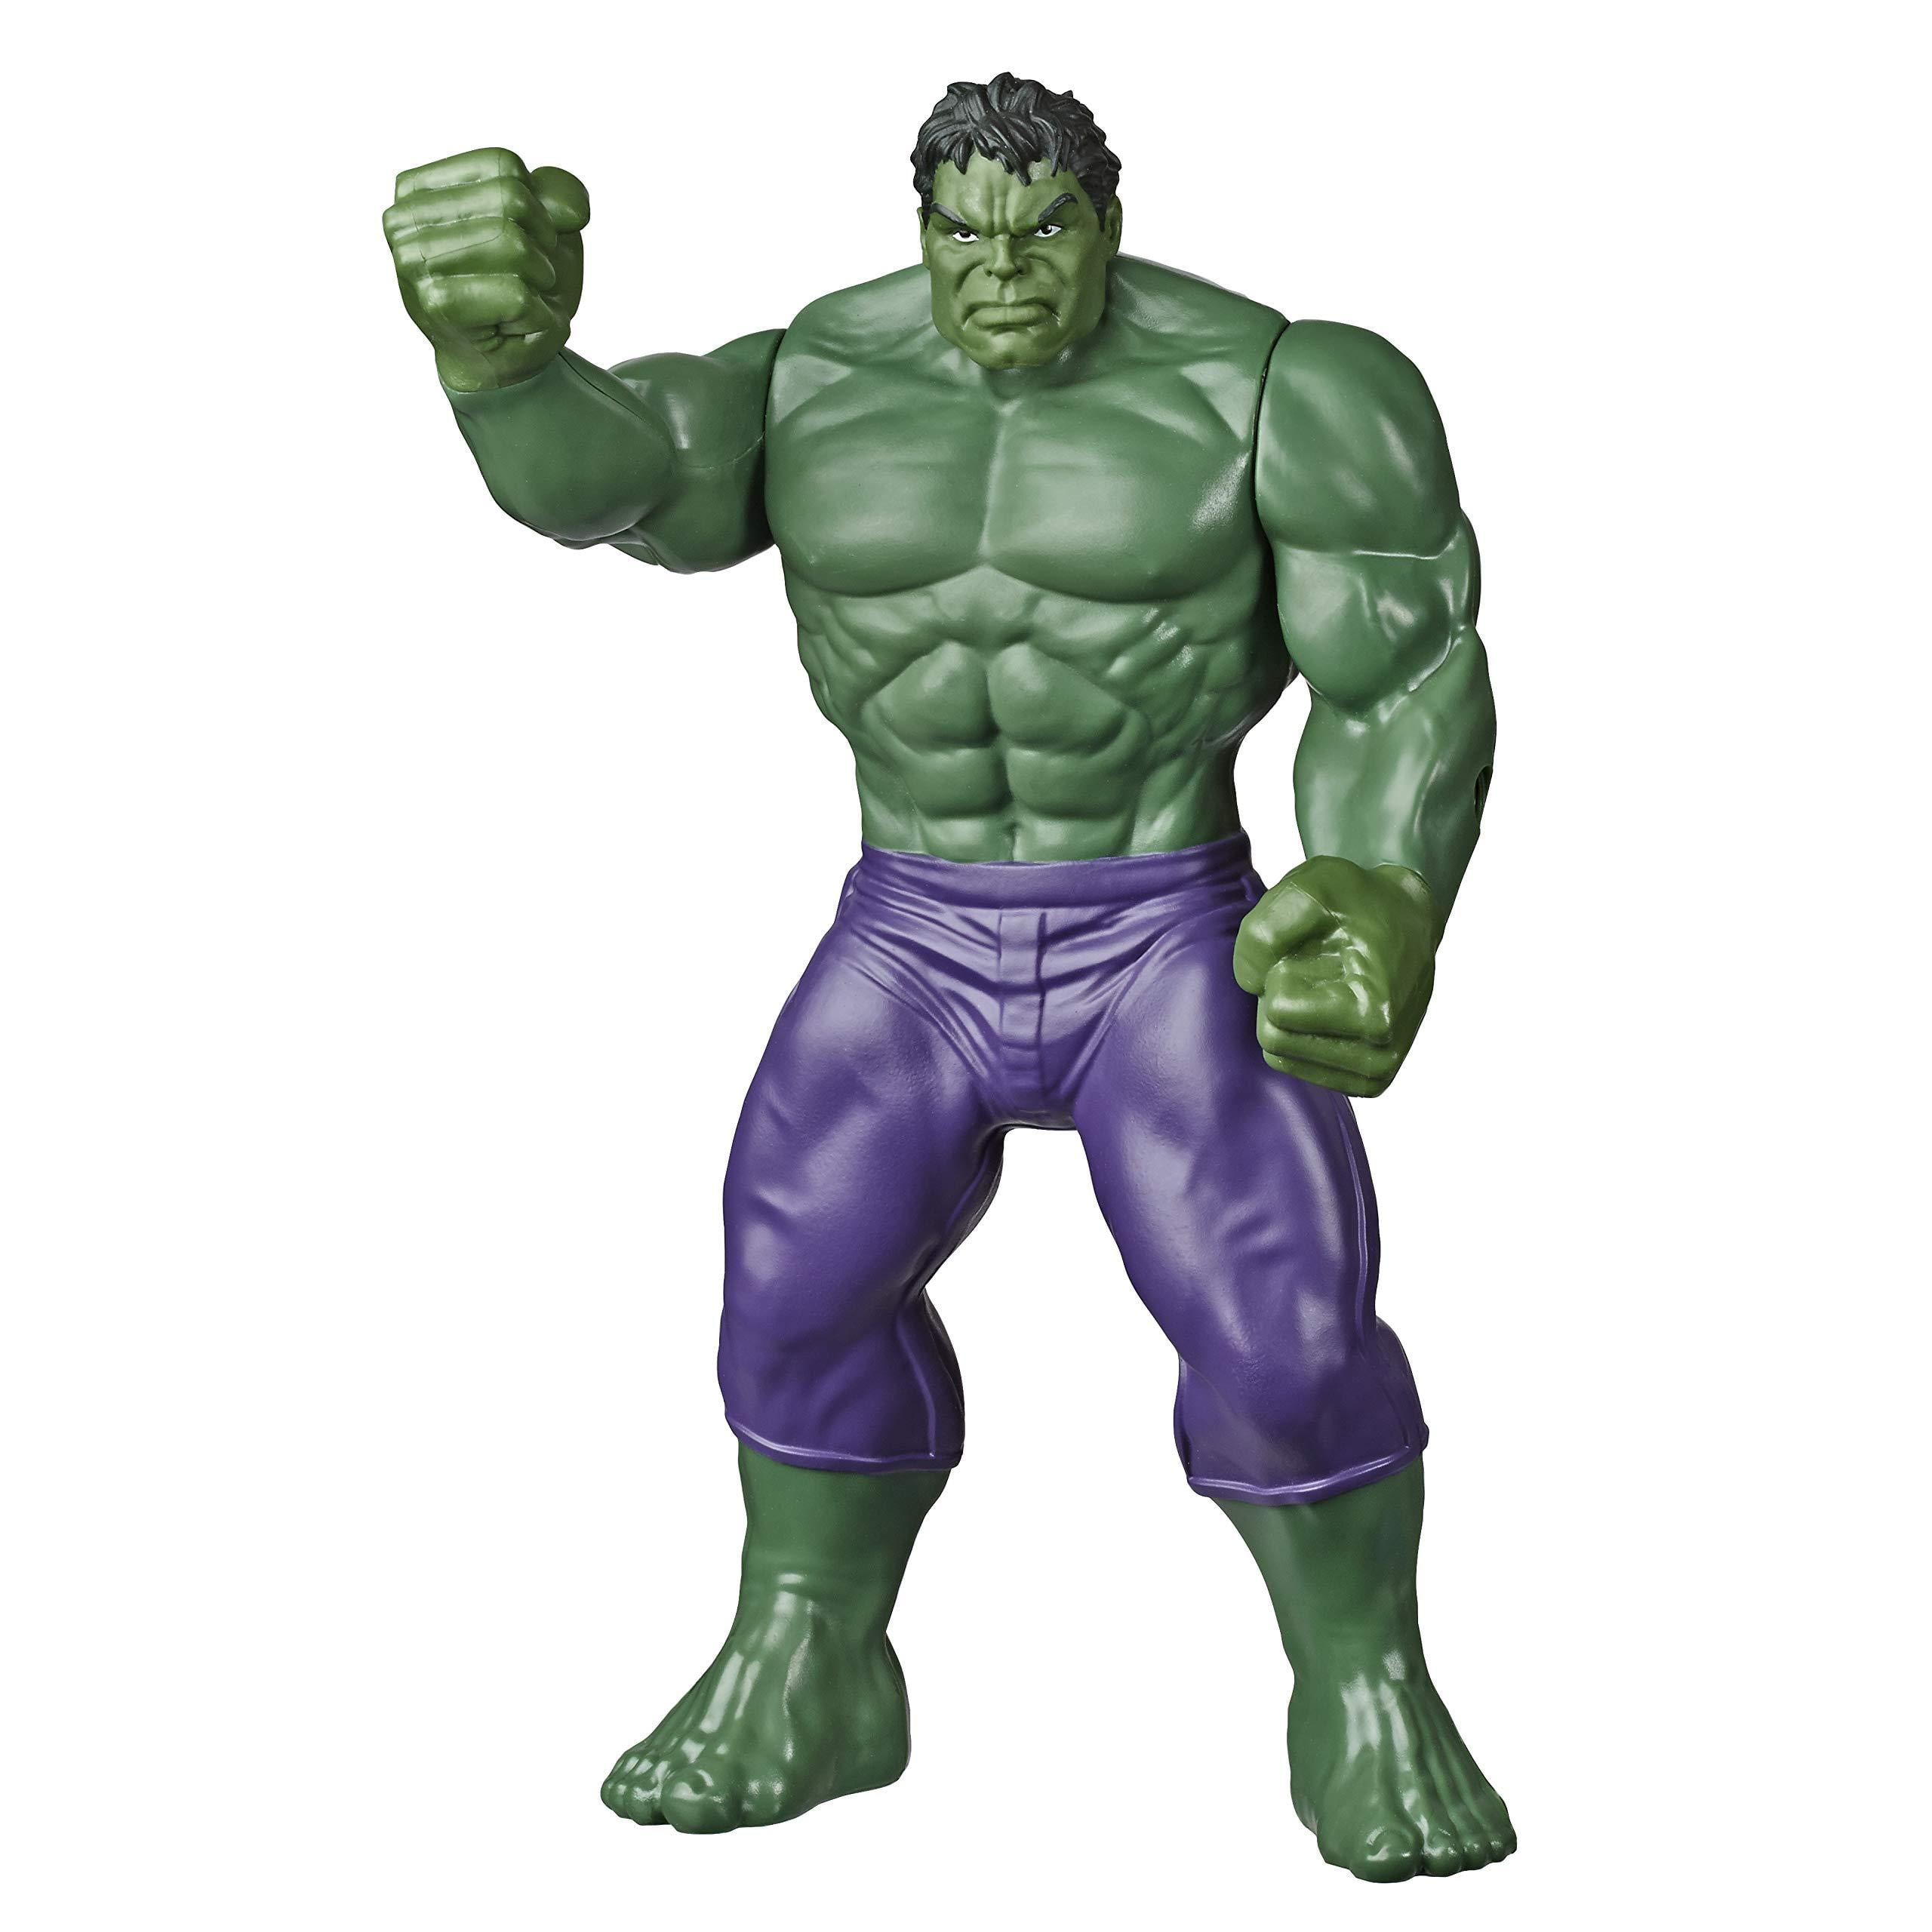 Avengers Age of Ultron The Incredible Hulk Action Statue Figure 9.5" Toys 